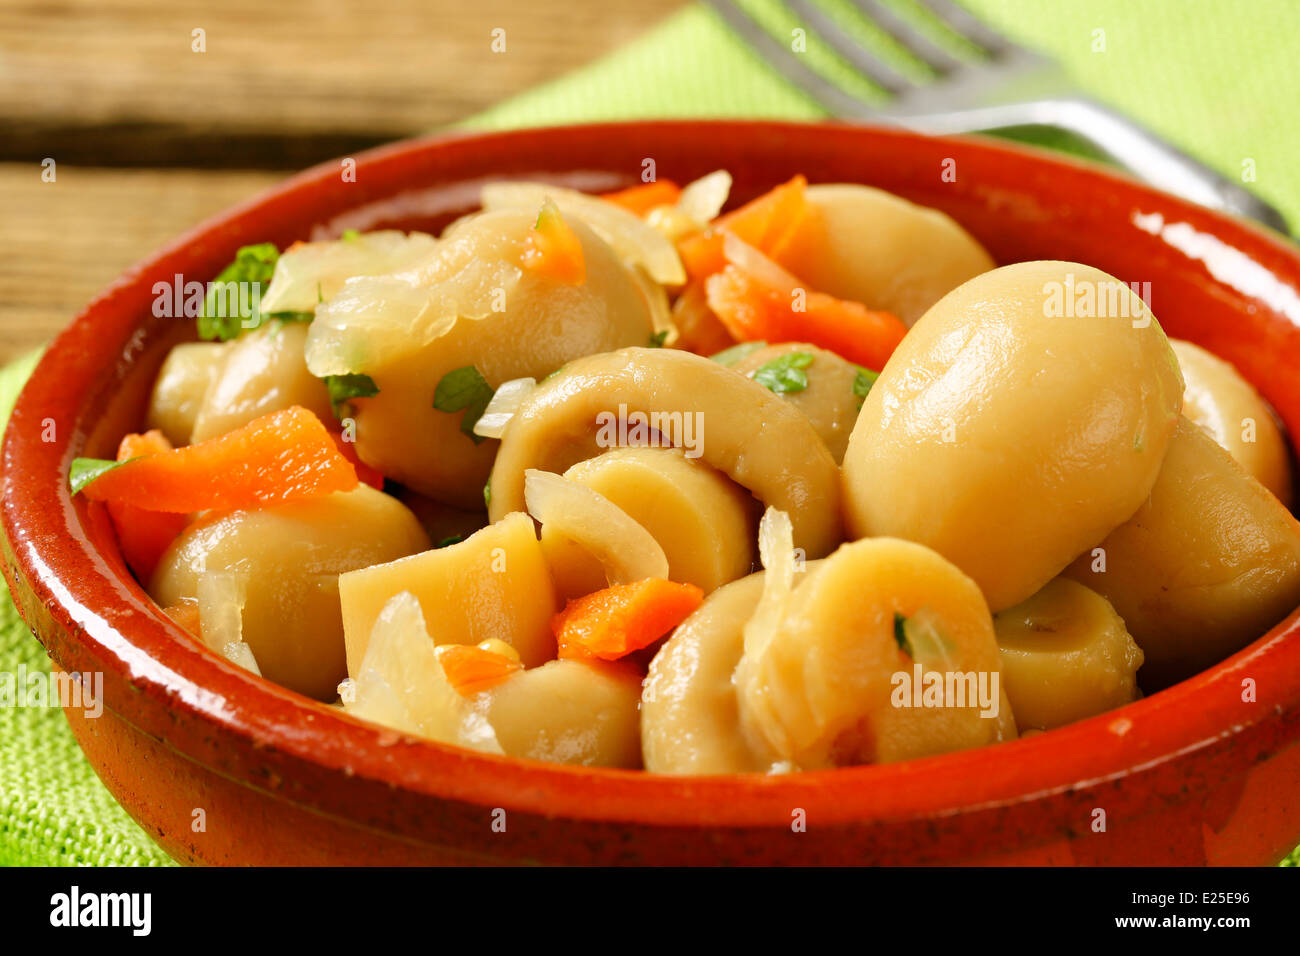 Marinated mushrooms with carrot and onion Stock Photo